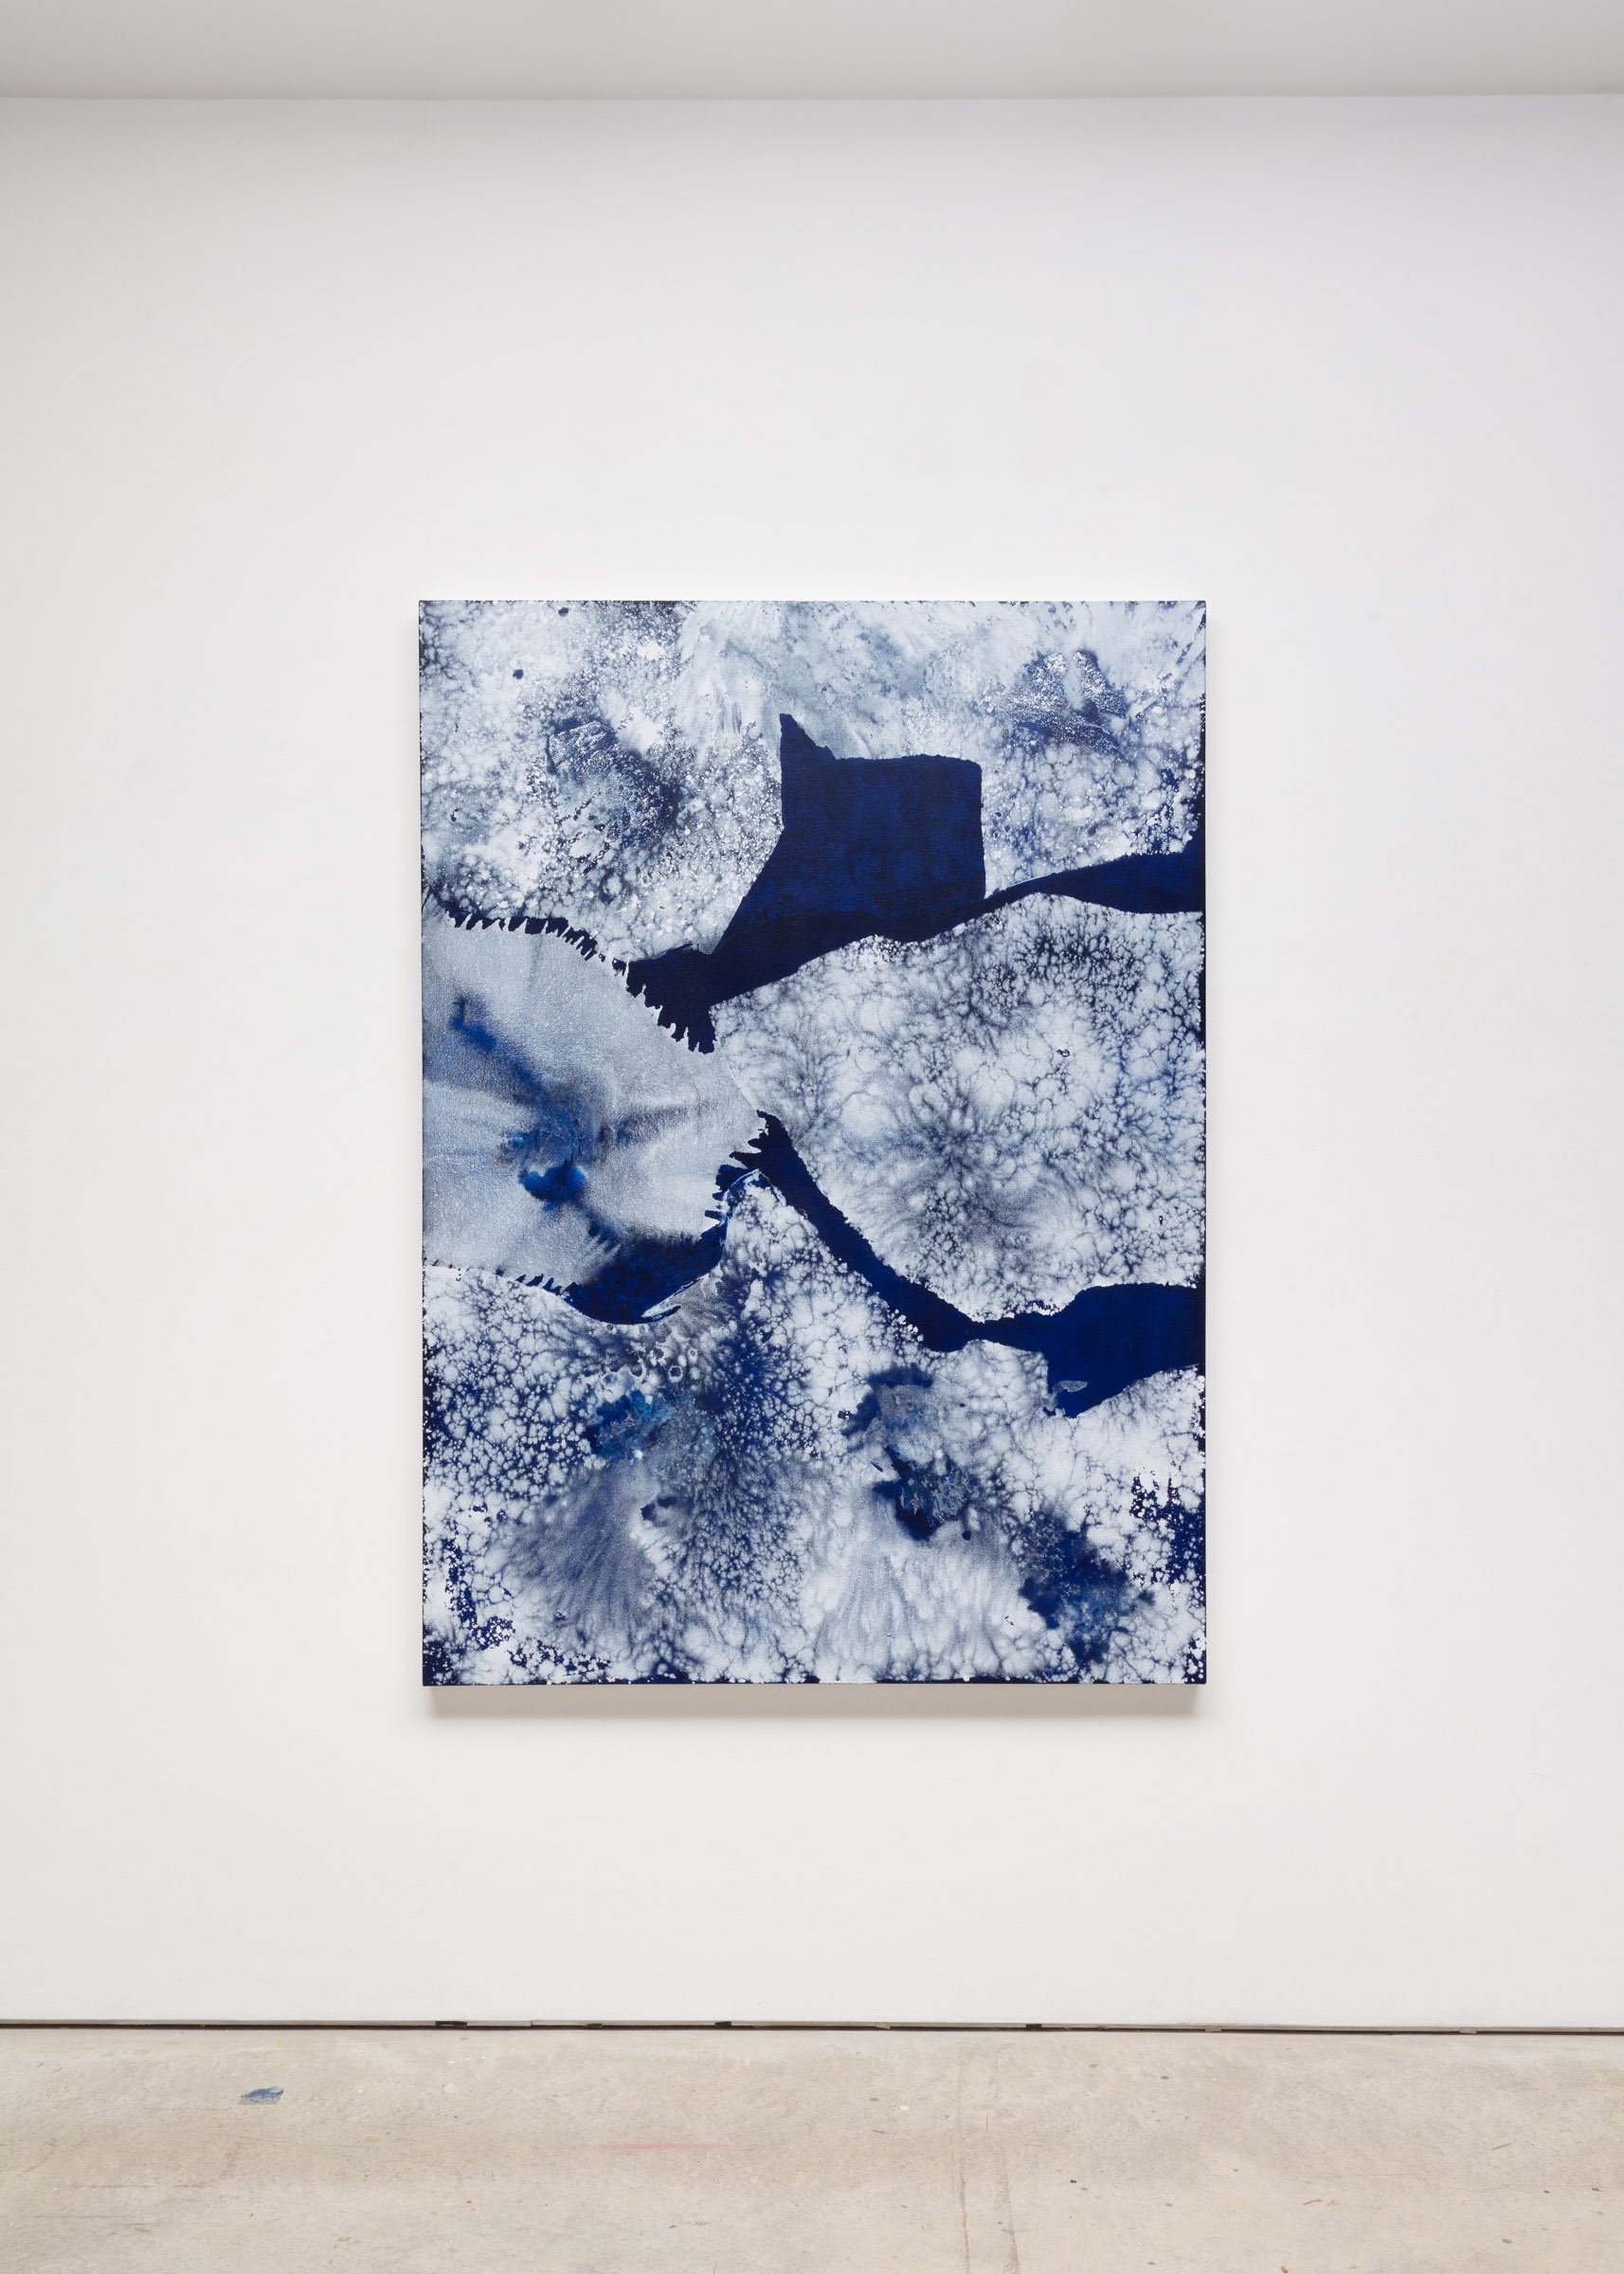  Celia Neubauer  Whispers in Ice, no. 6, 2023  acrylic on canvas 66 x 48 inches   SOLD 